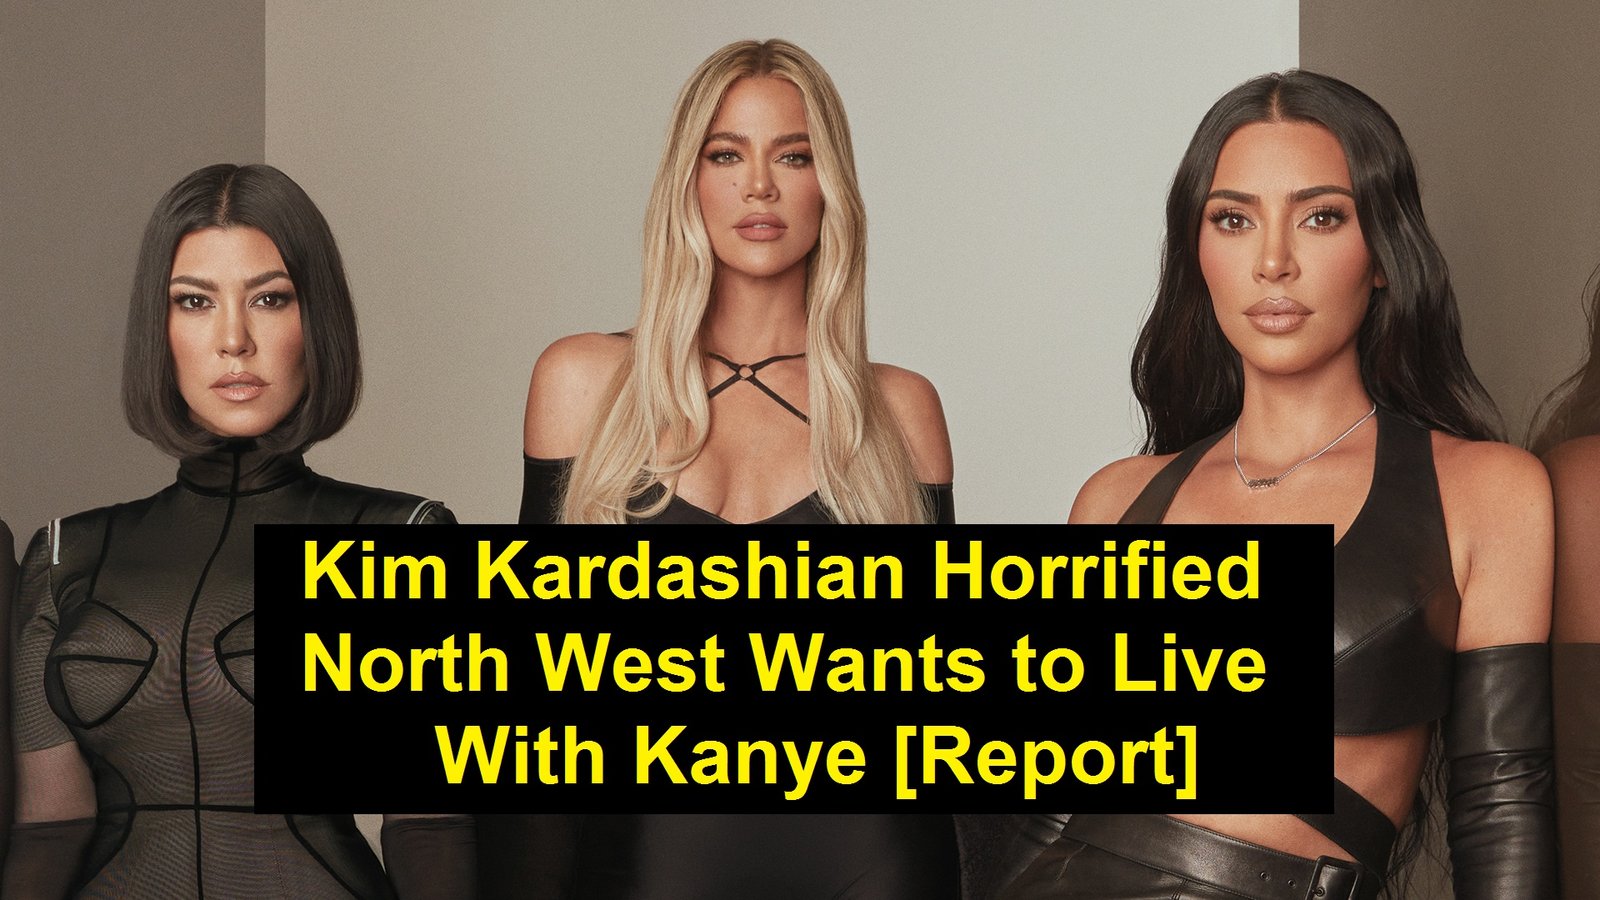 Kim Kardashian Horrified North West Wants to Live With Kanye [Report]